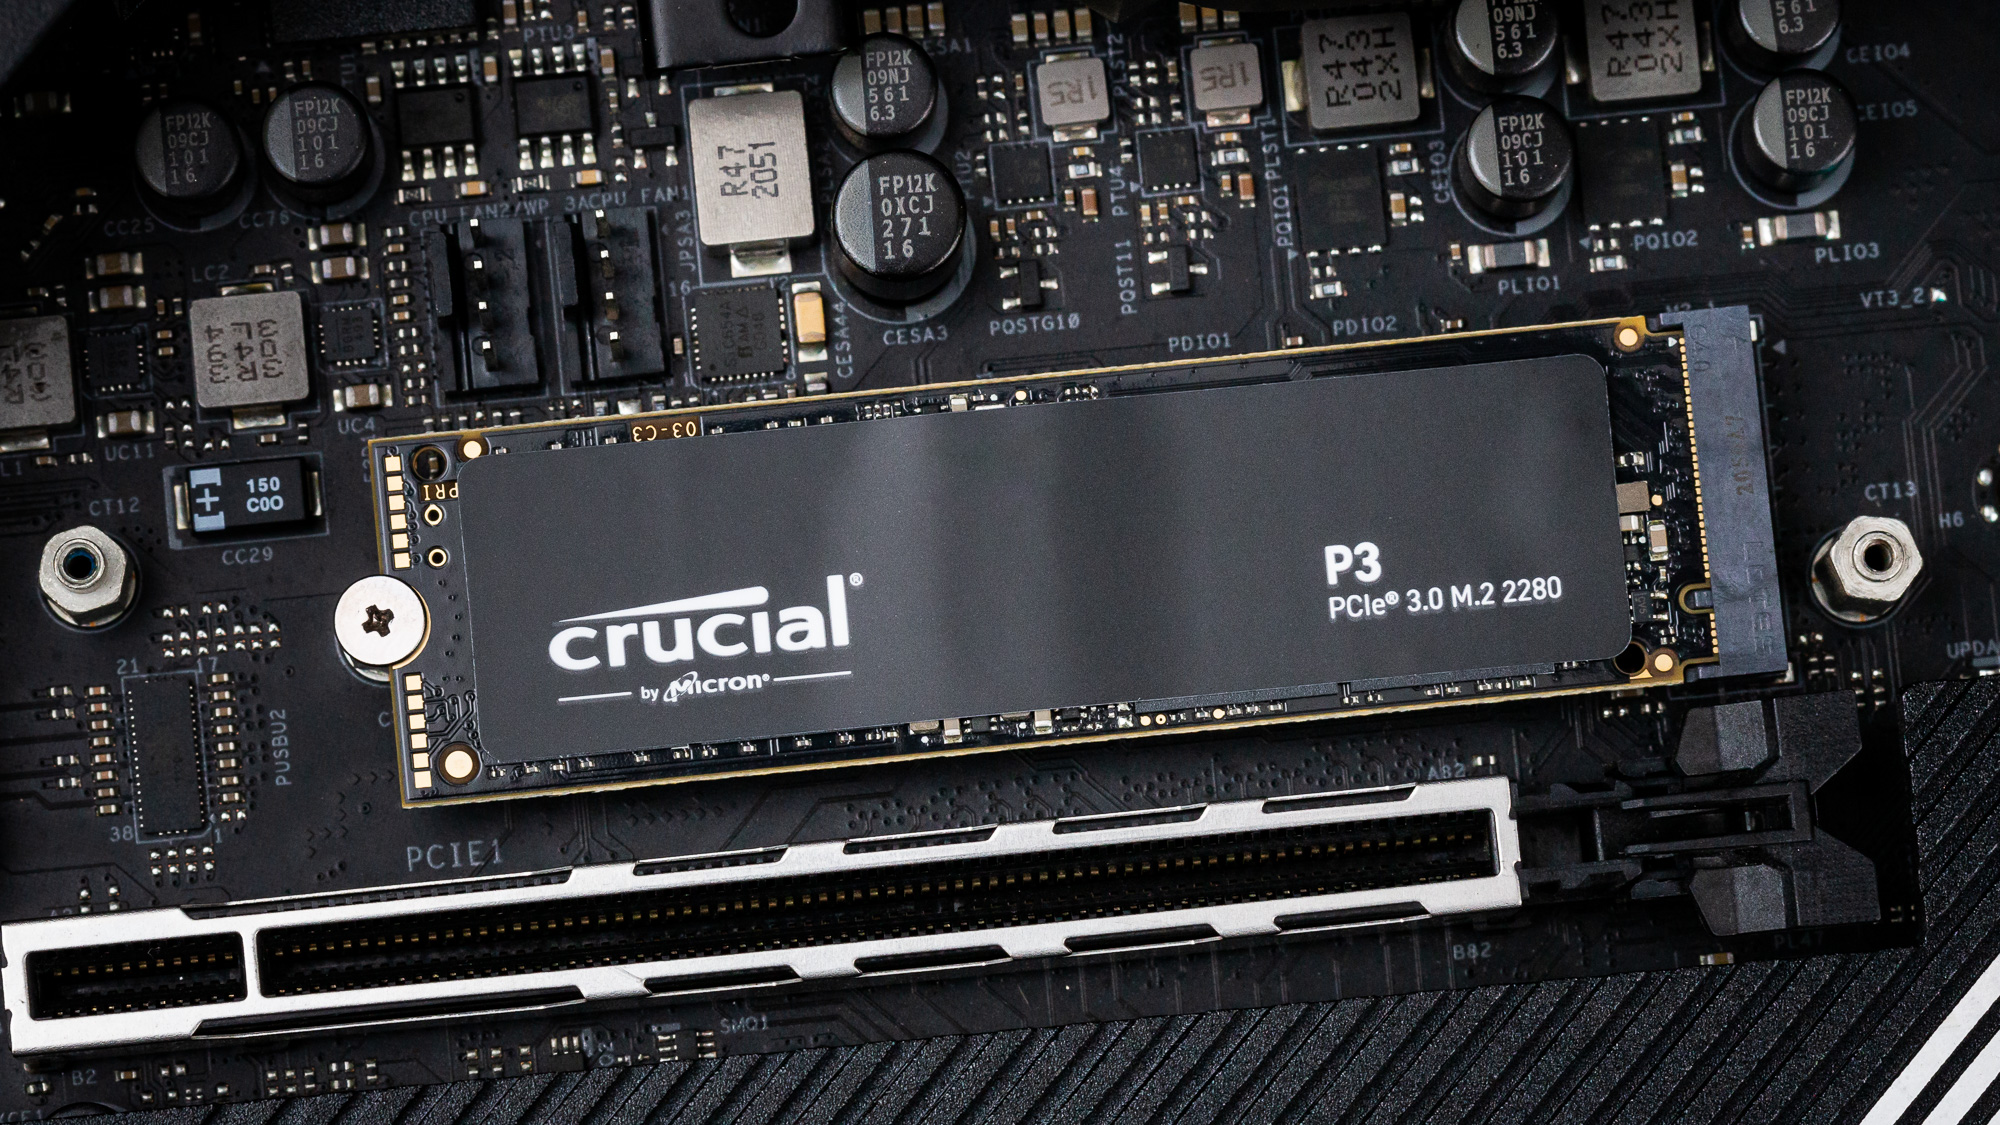  Crucial P3 SSD